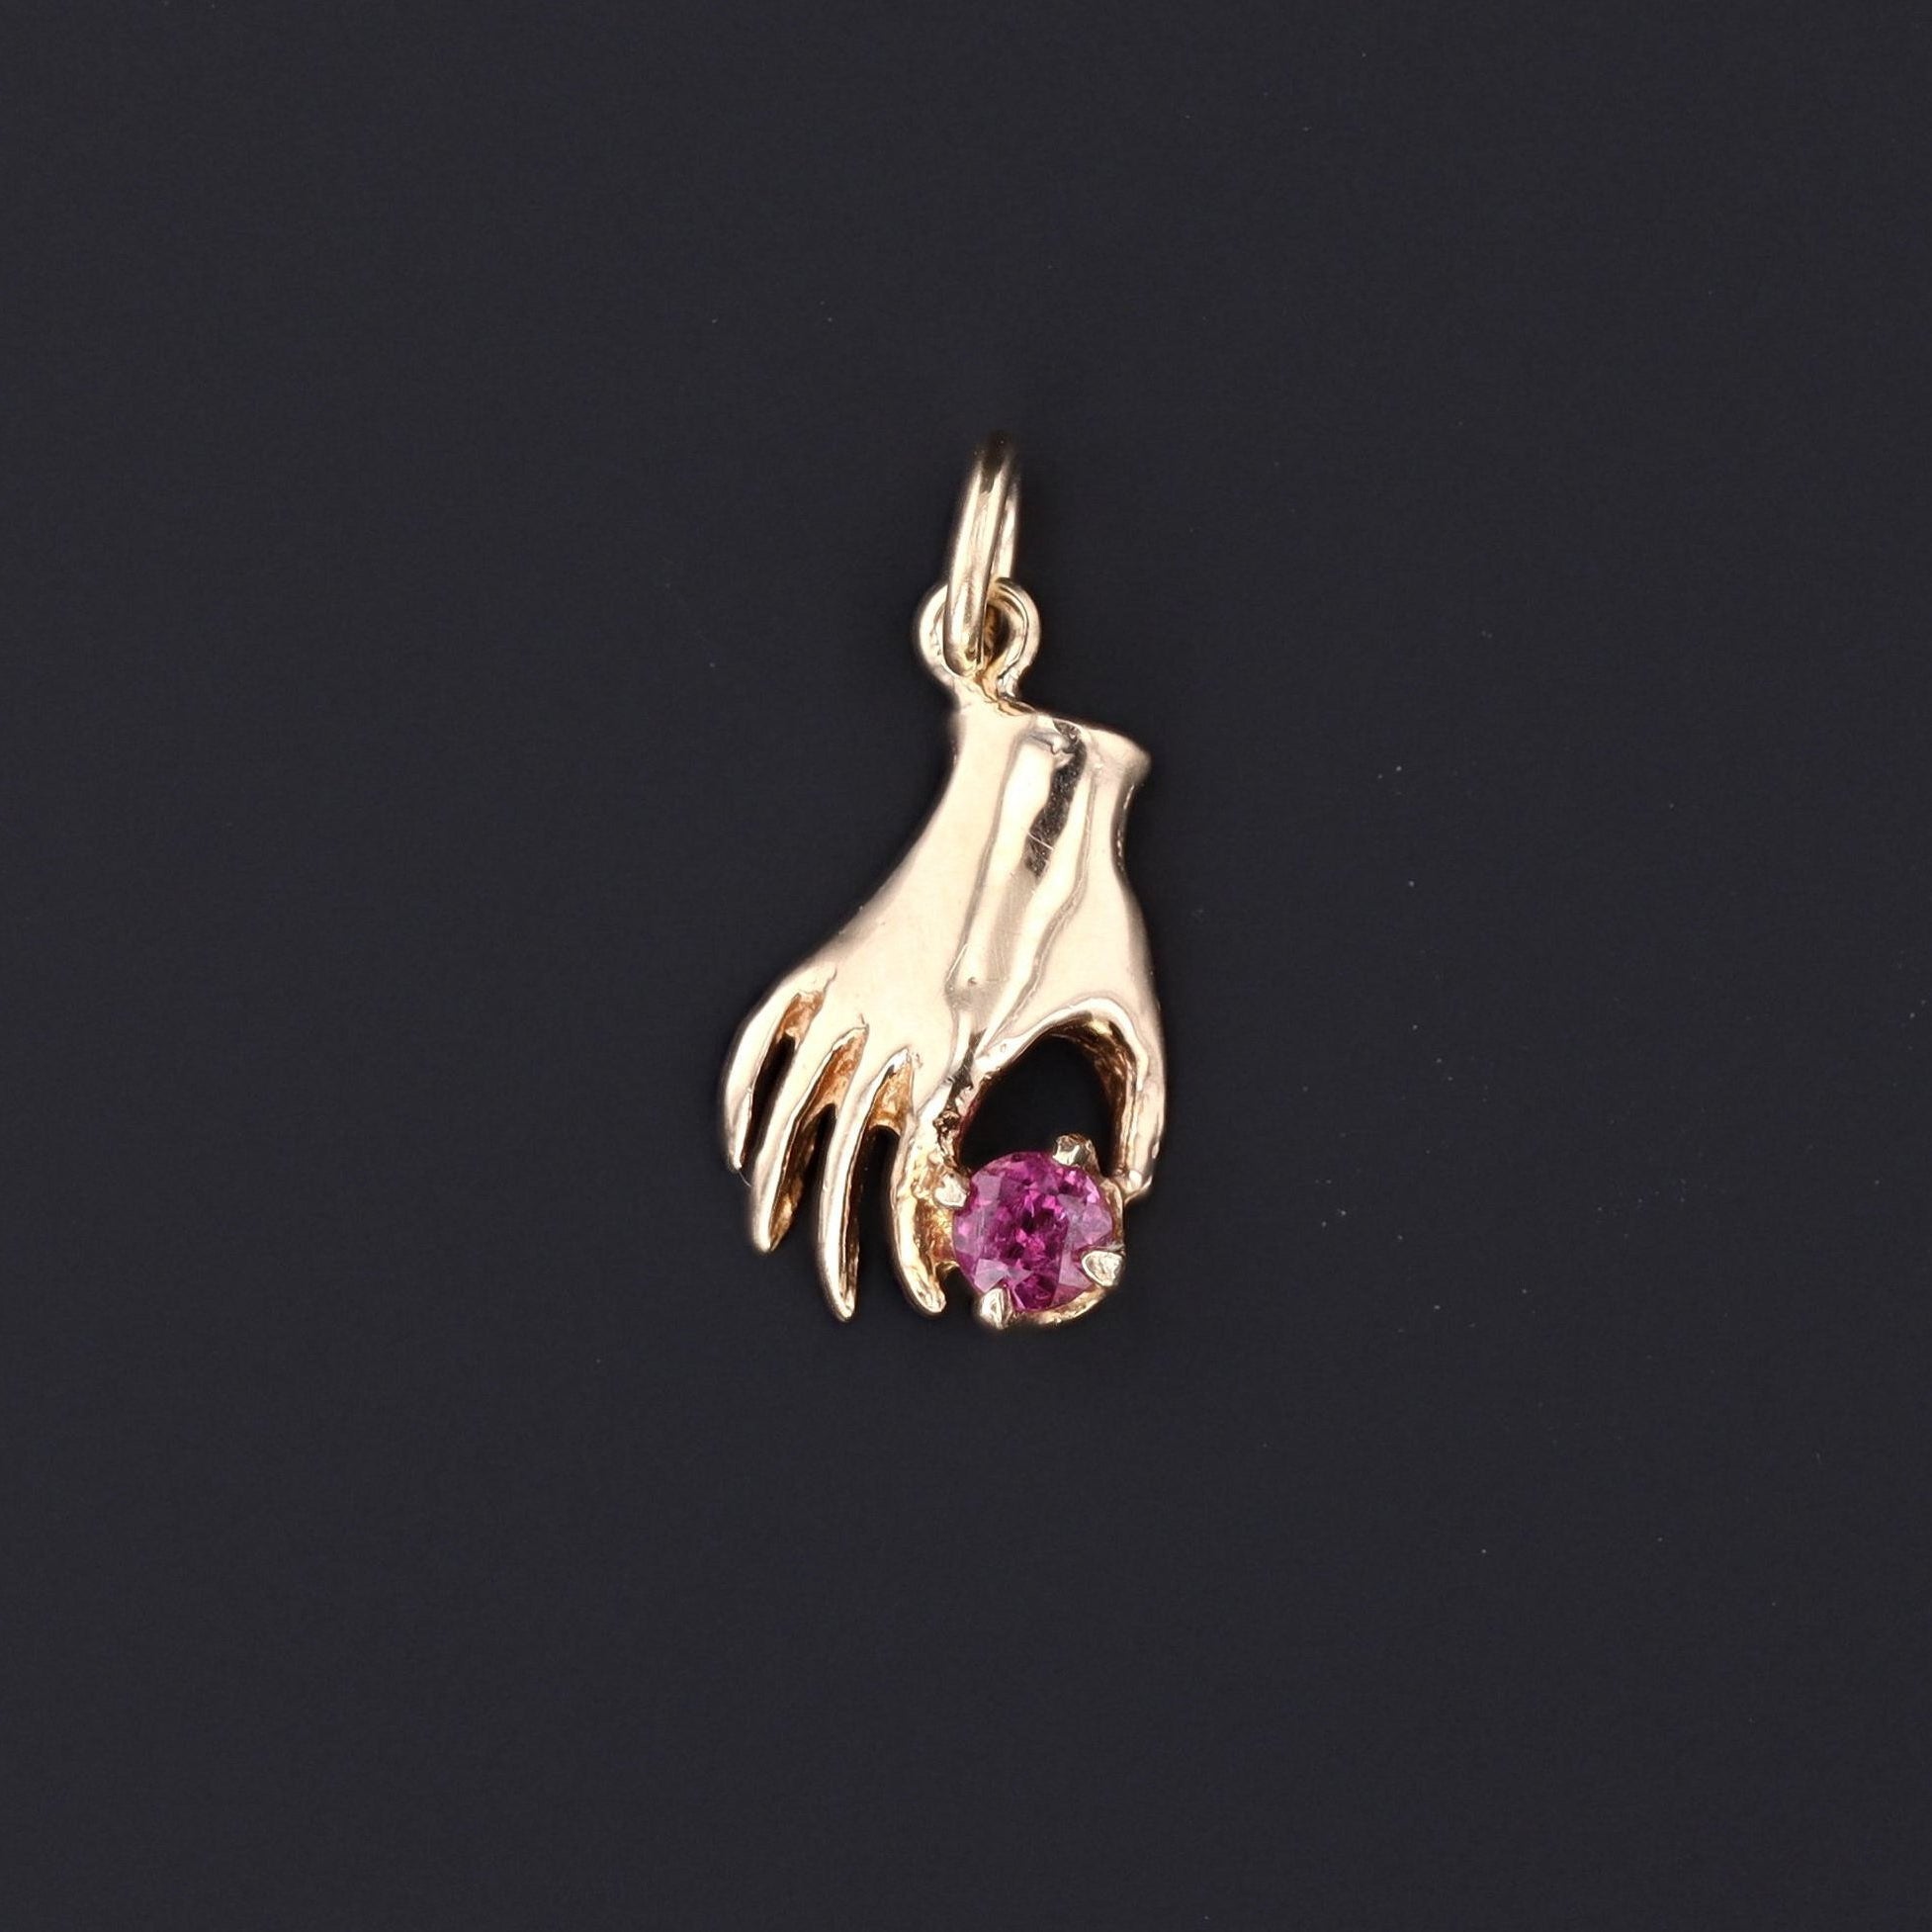 Hand Charm | Vintage Hand Charm | 9ct Gold Hand Holding Ruby Charm | Pin Conversion Charm | 9ct Gold Charm